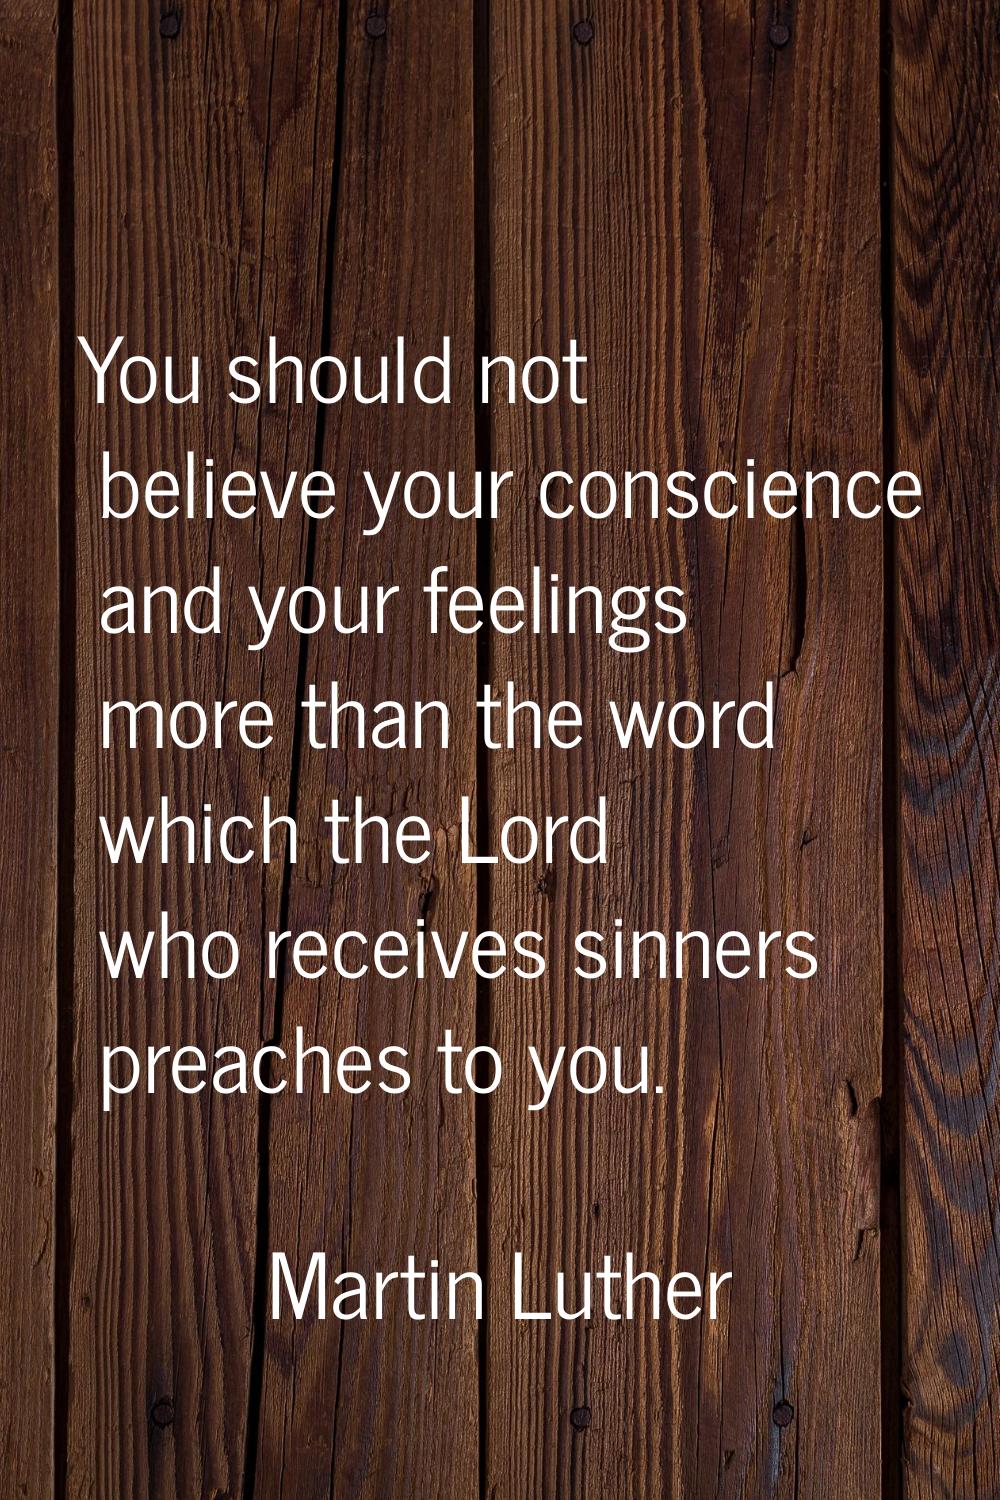 You should not believe your conscience and your feelings more than the word which the Lord who rece